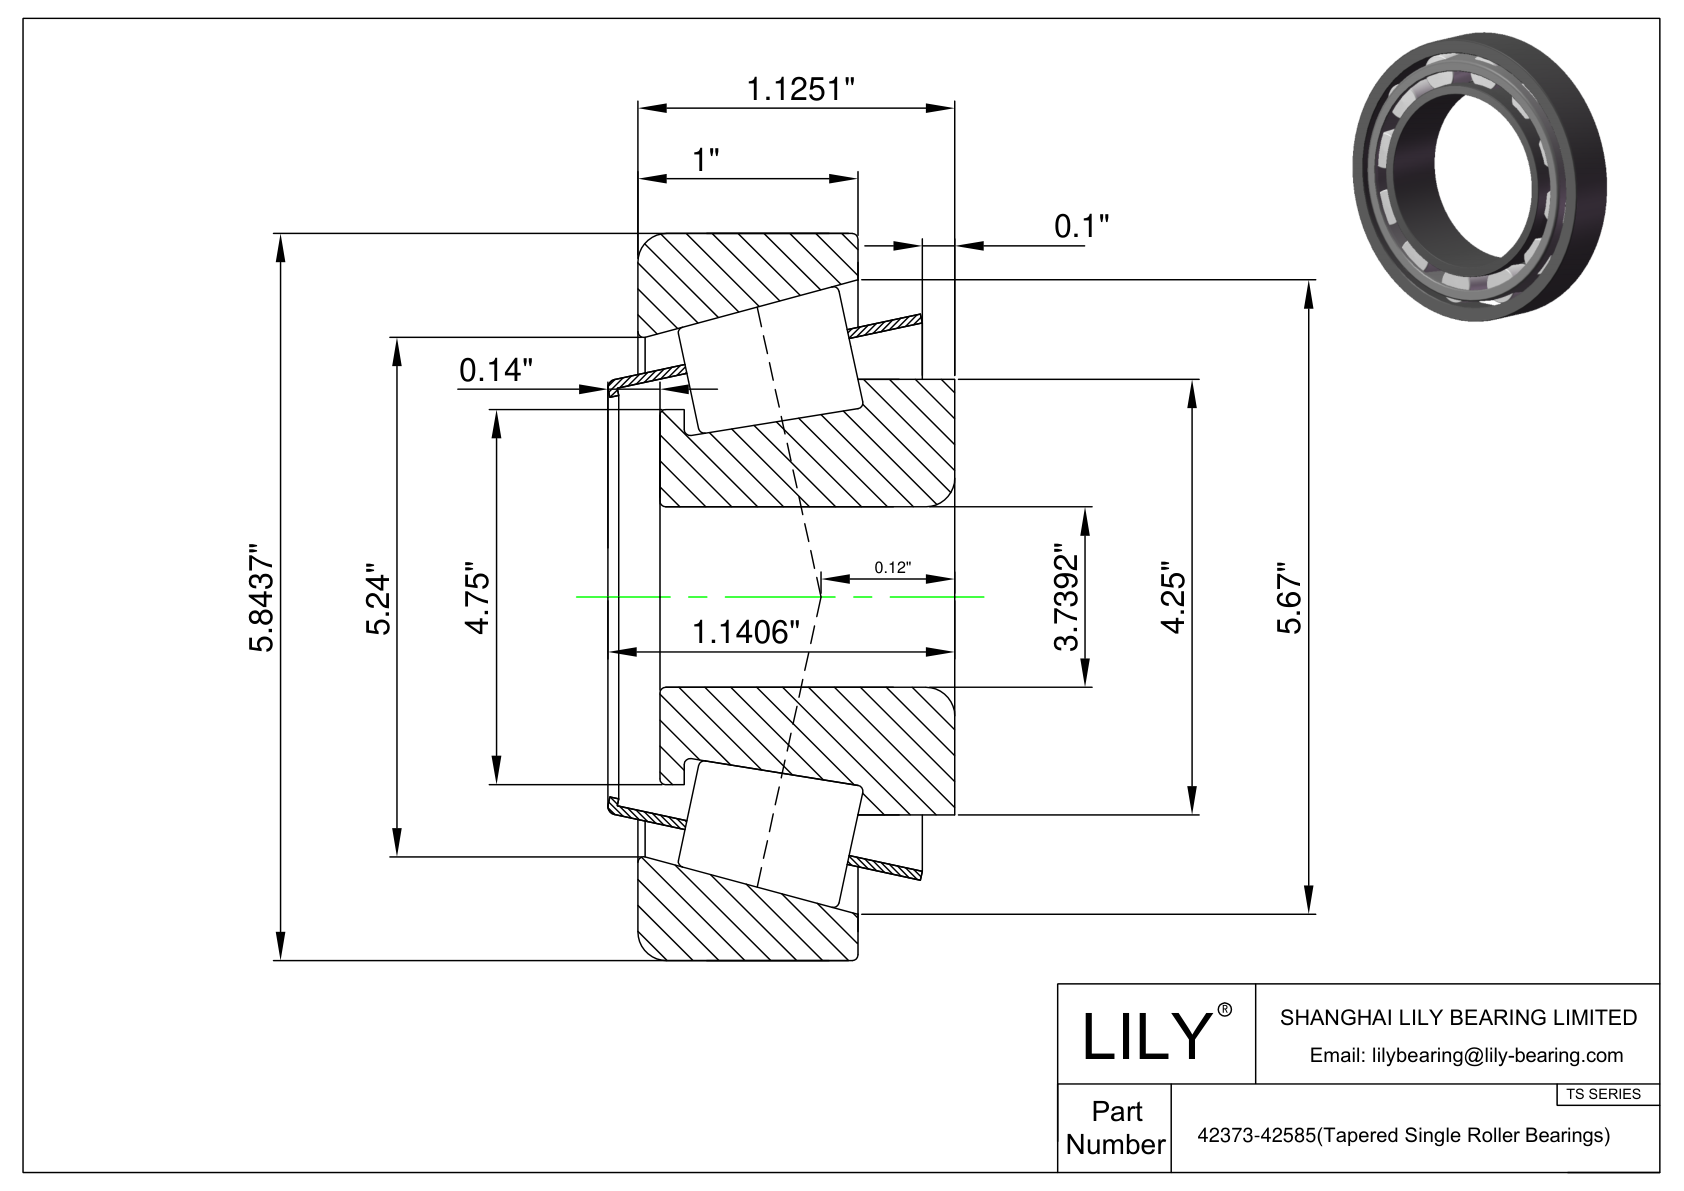 42373-42585 TS (Tapered Single Roller Bearings) (Imperial) cad drawing